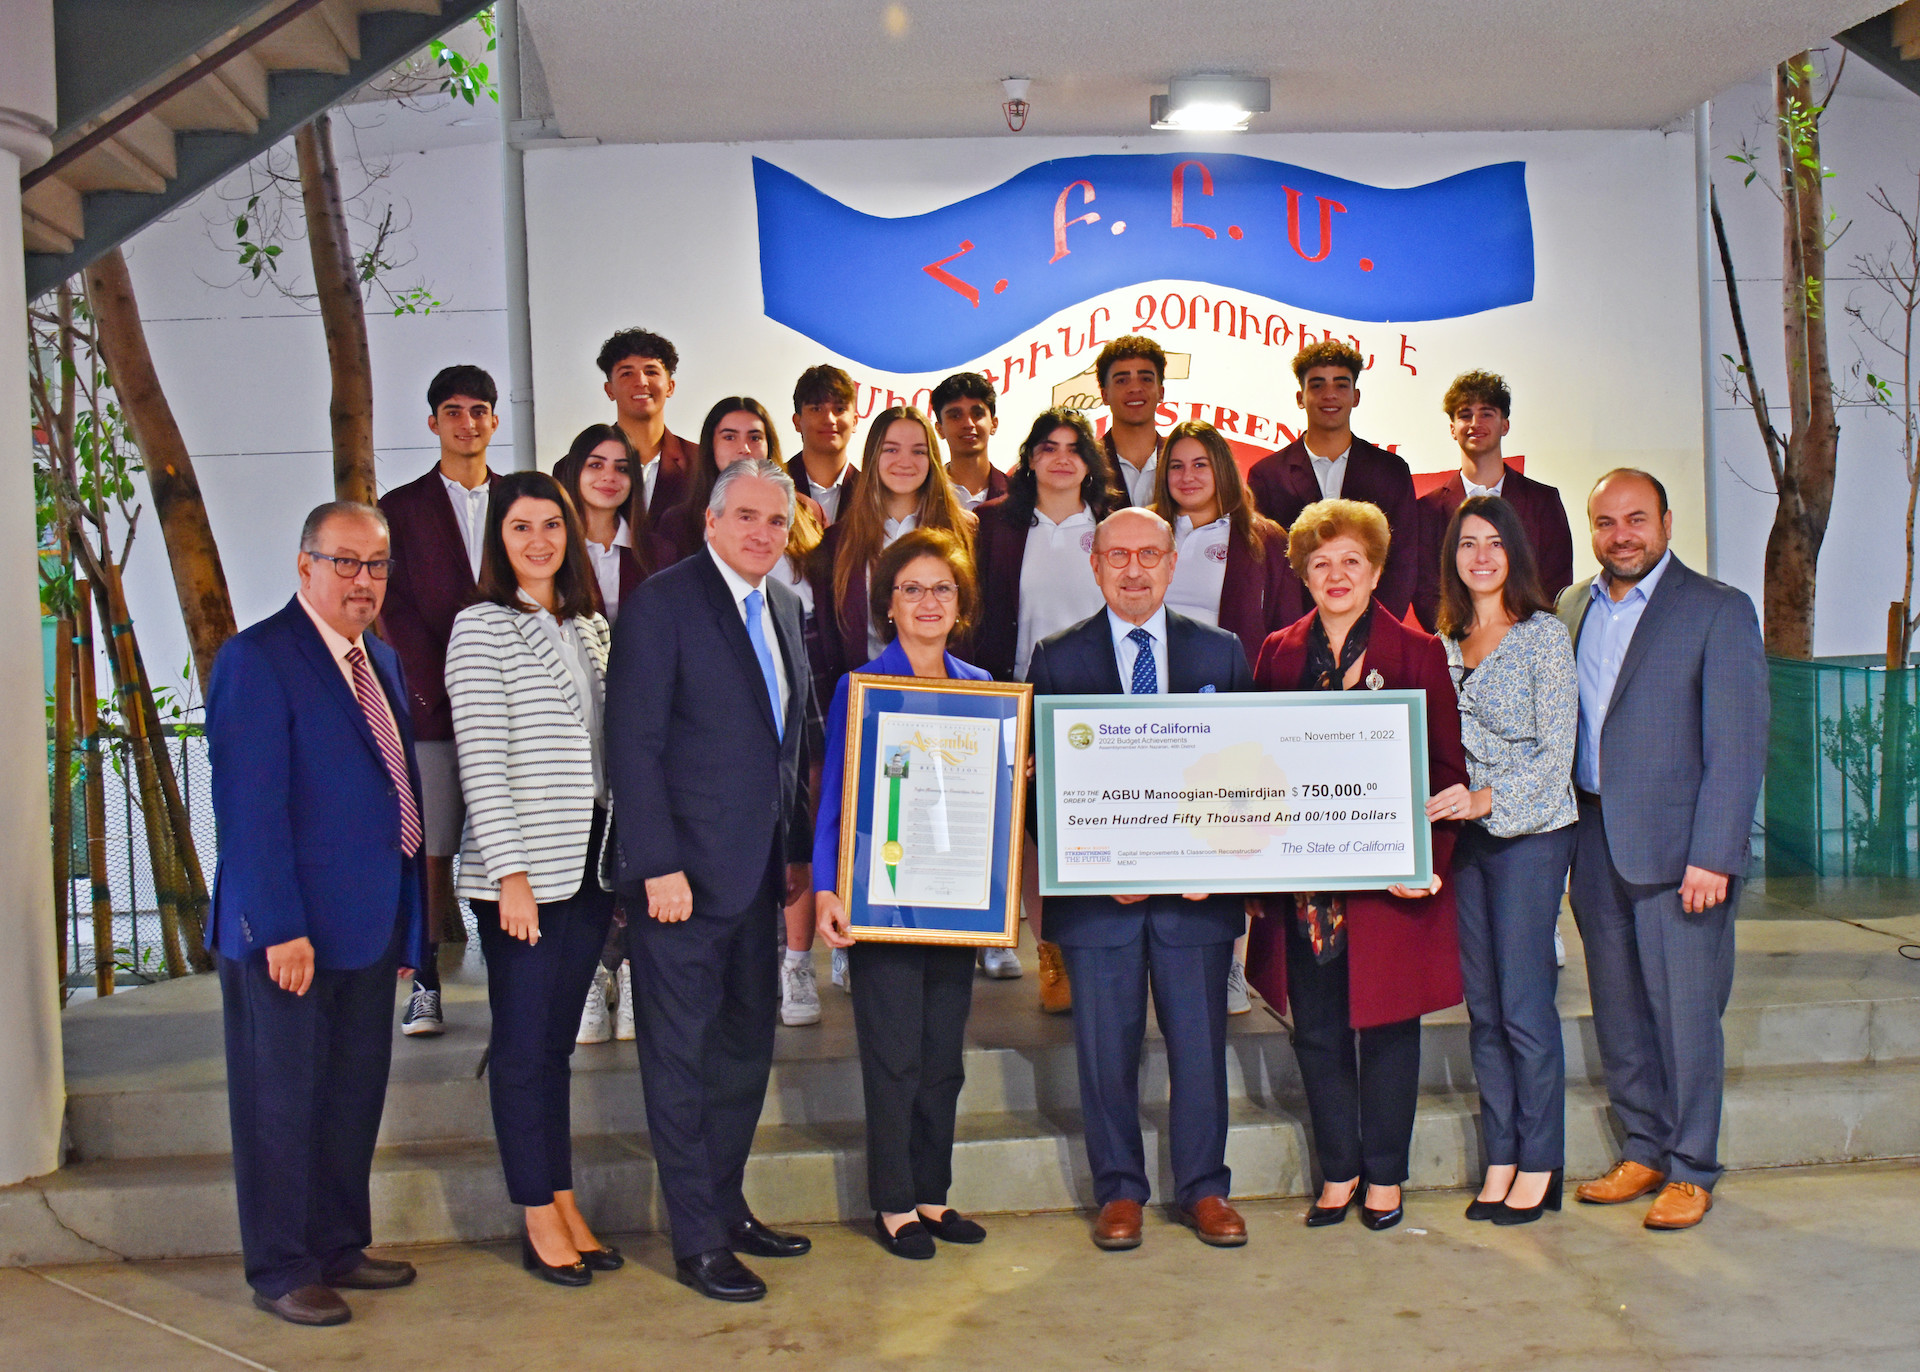 Assemblymember Adrin Nazarian visits AGBU Manoogian-Demirdjian School to announce a $750,000 grant for the Collaborative Learning Center (CLC) Project.